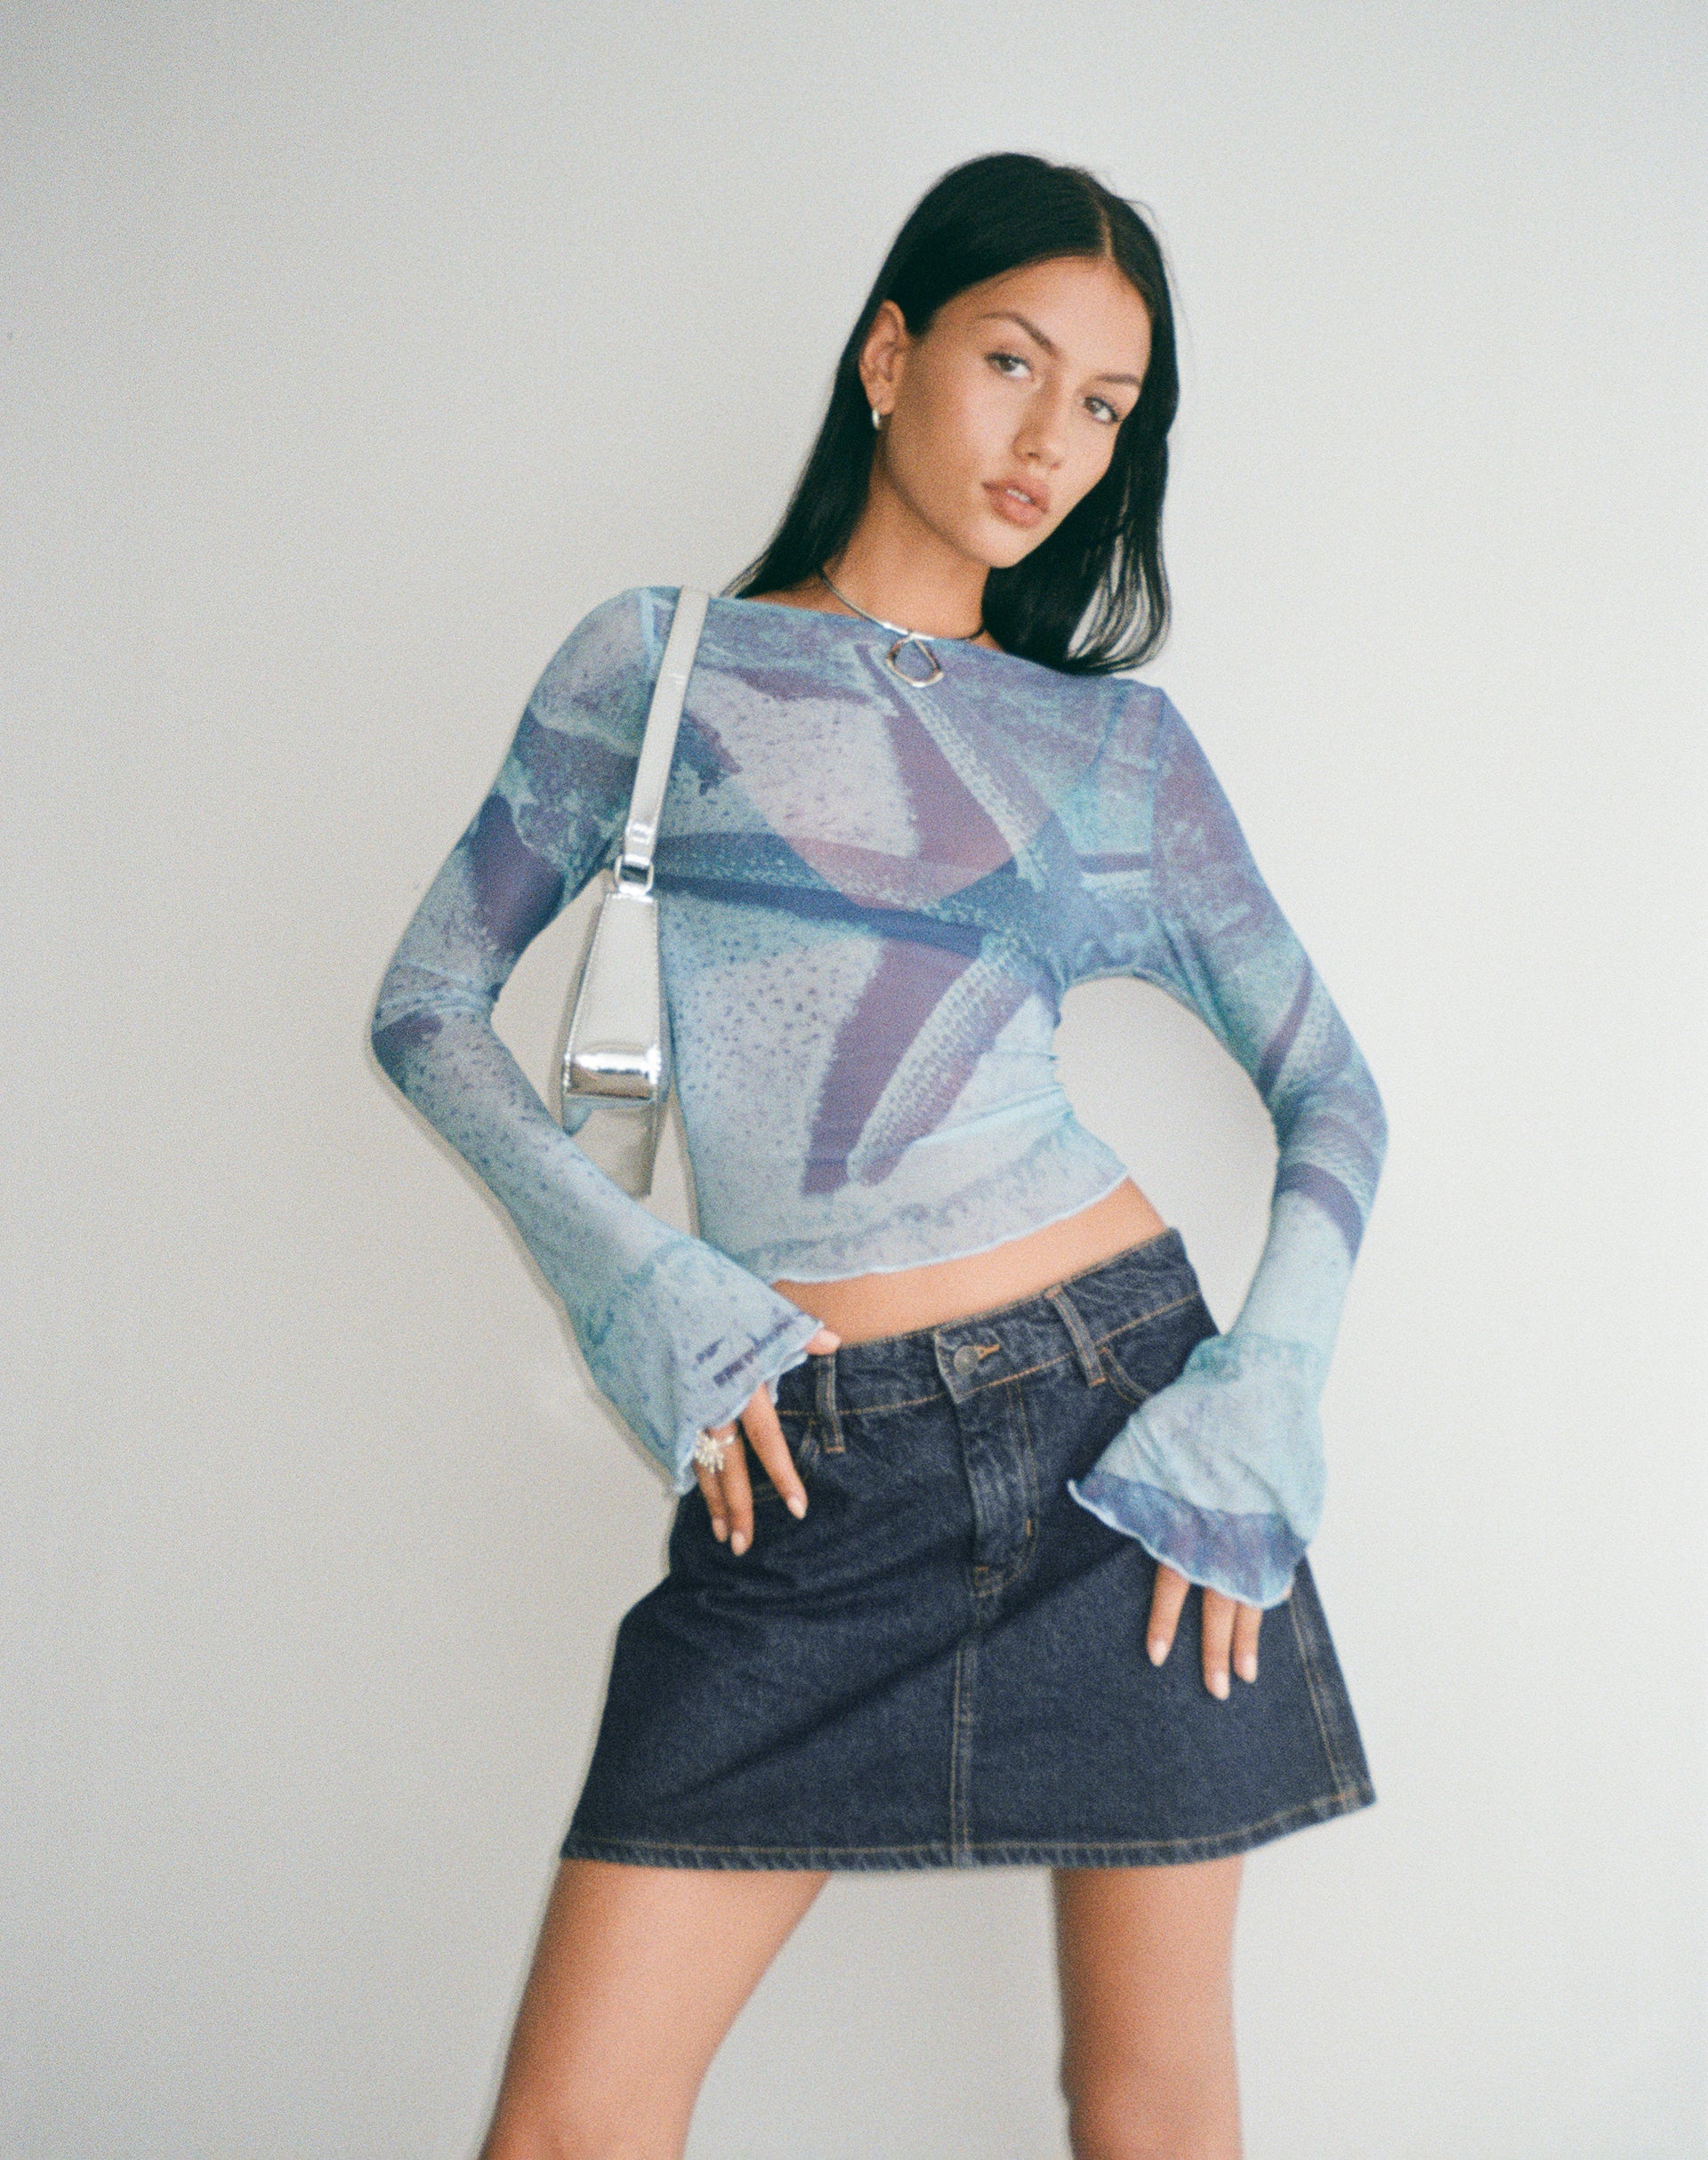 Image of Anchi Mesh Long Sleeve Top in Blue Starfish Photoprint